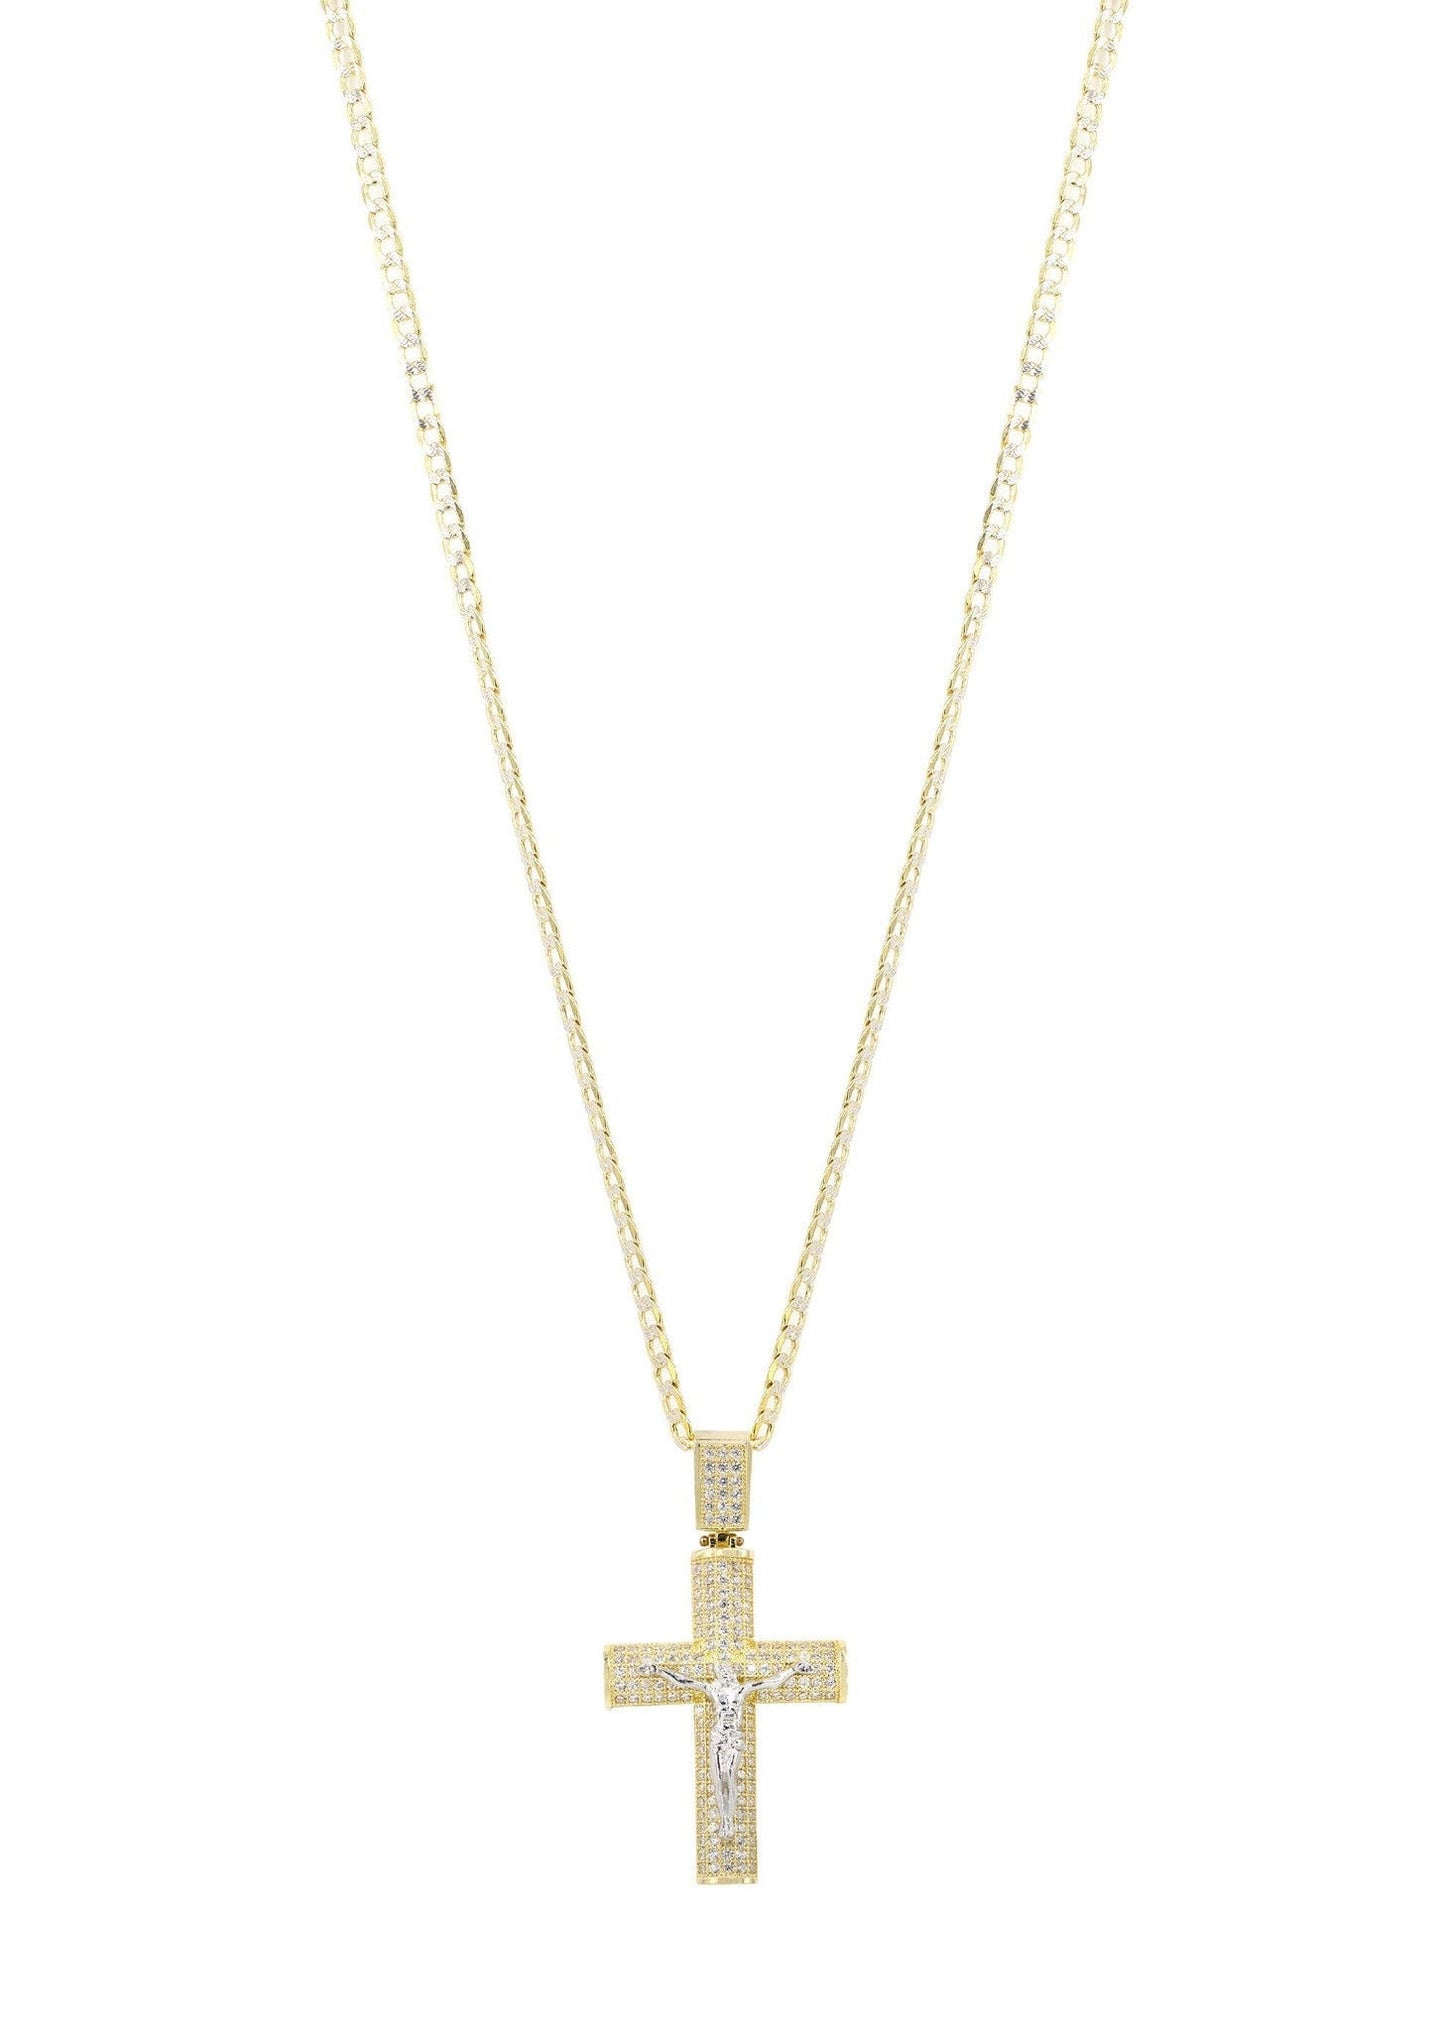 10K Yellow Gold Pave Cuban Chain & Cz Gold Cross Necklace